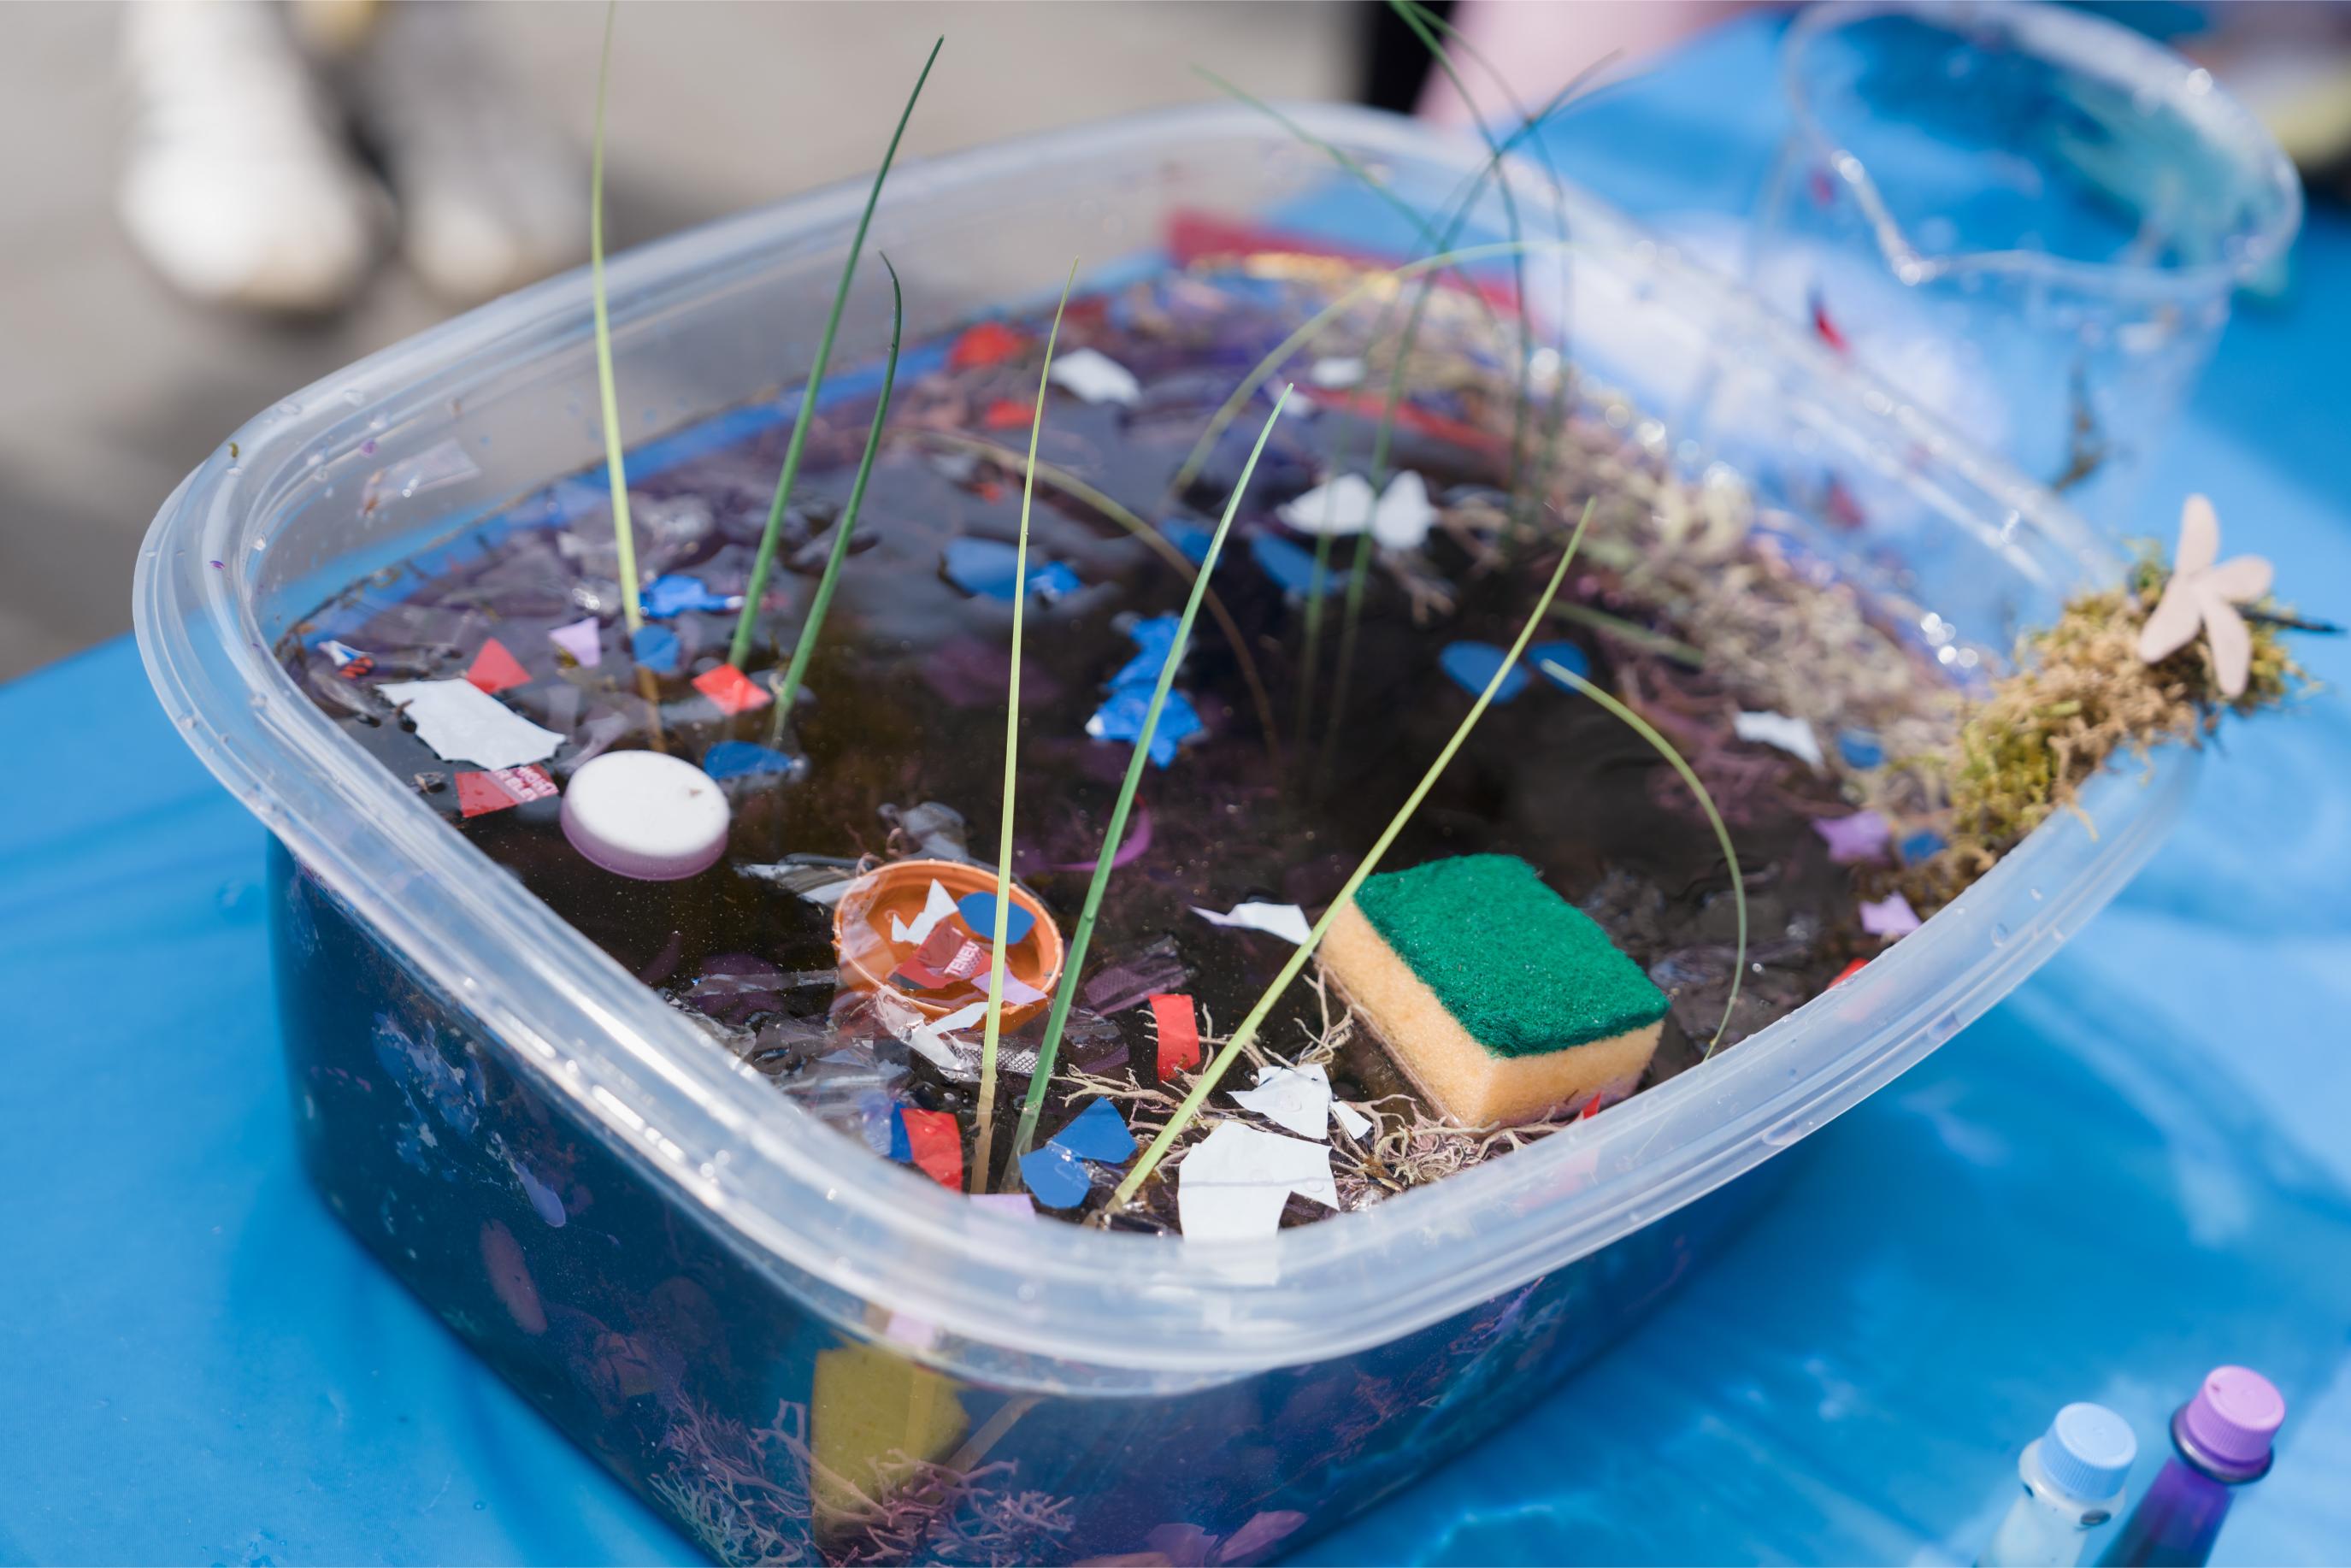 A container containing water and various plastic and pollutants to demonstrate a polluted pond.